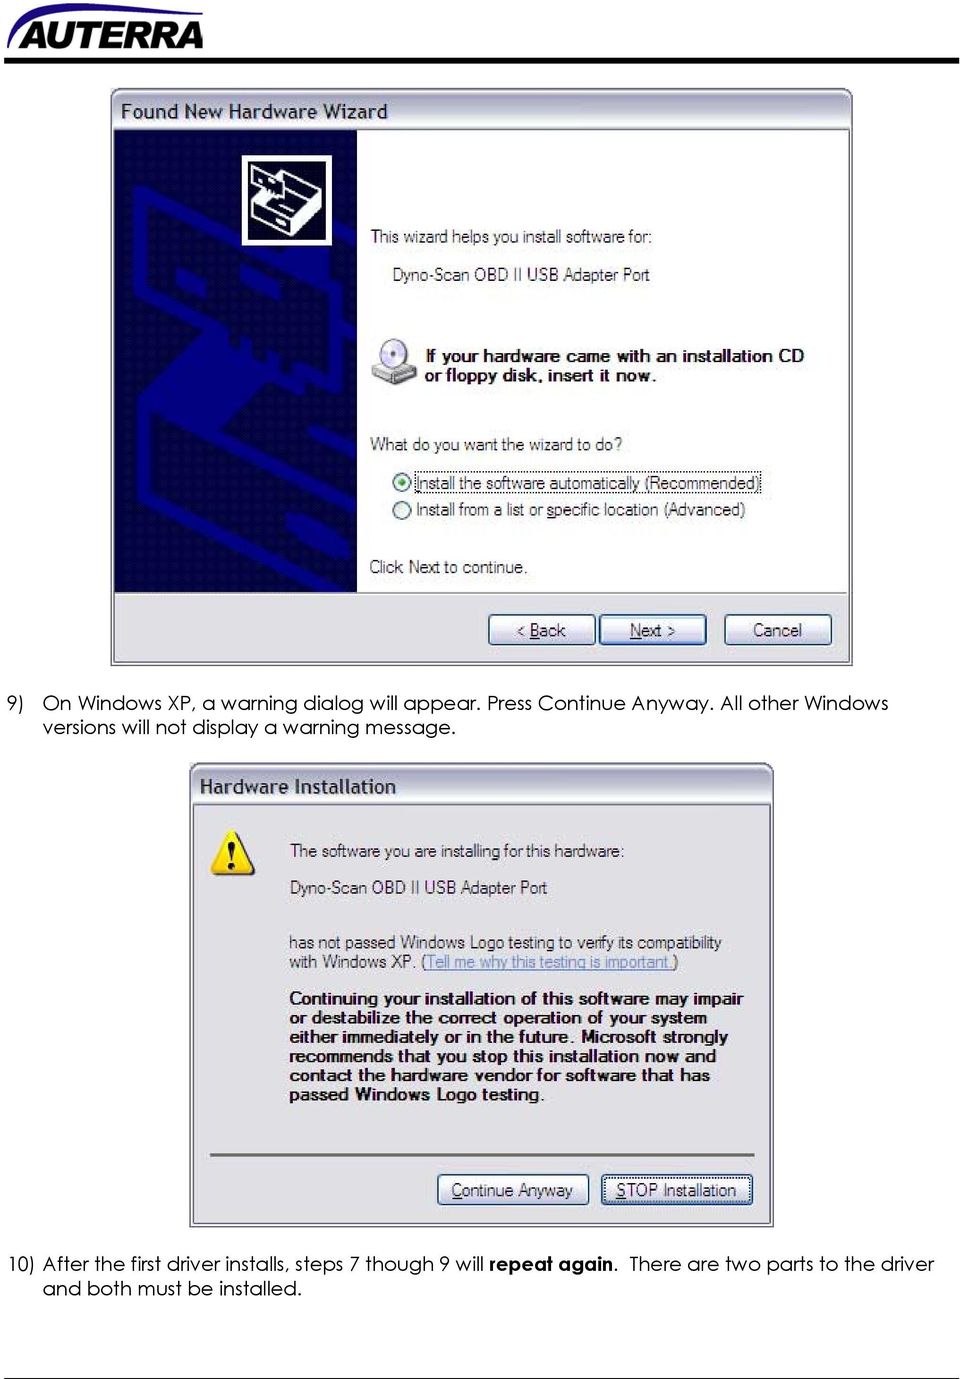 All other Windows versions will not display a warning message.